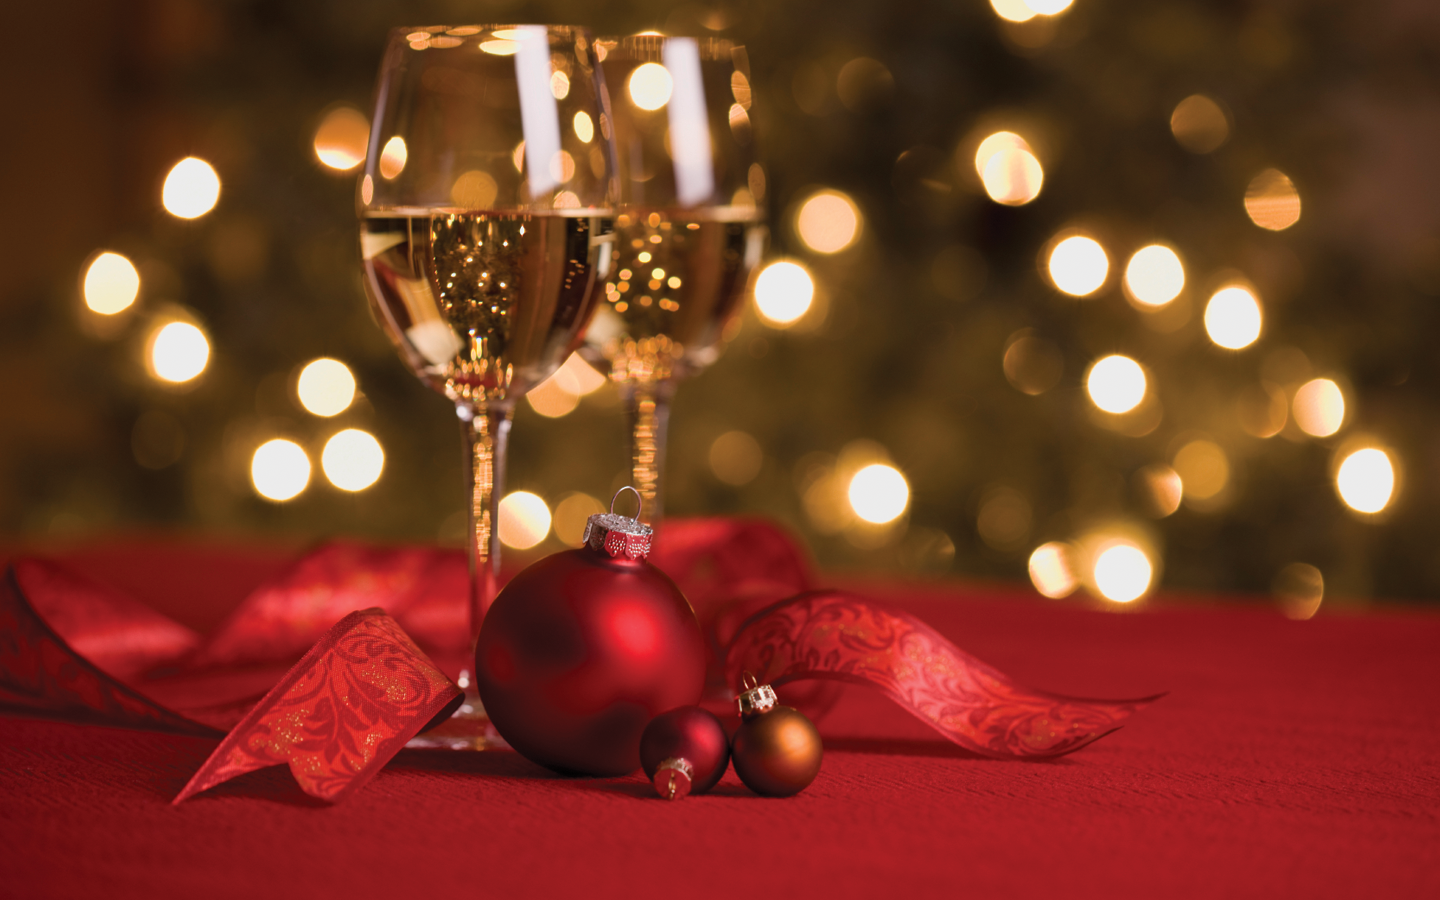 Wine and Ornaments in a Holiday Setting